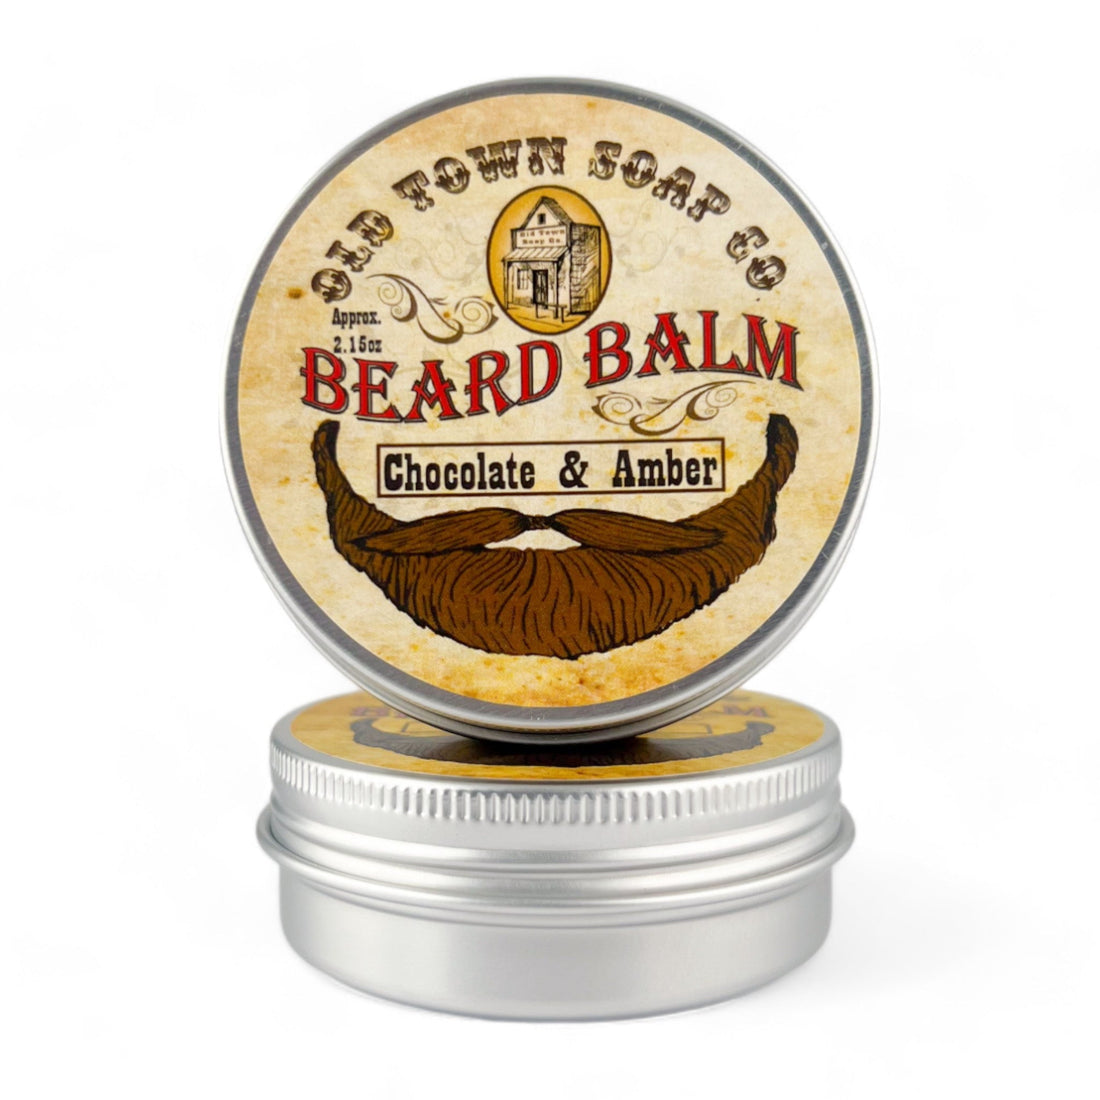 Chocolate &amp; Amber Beard Balm - Old Town Soap Co.